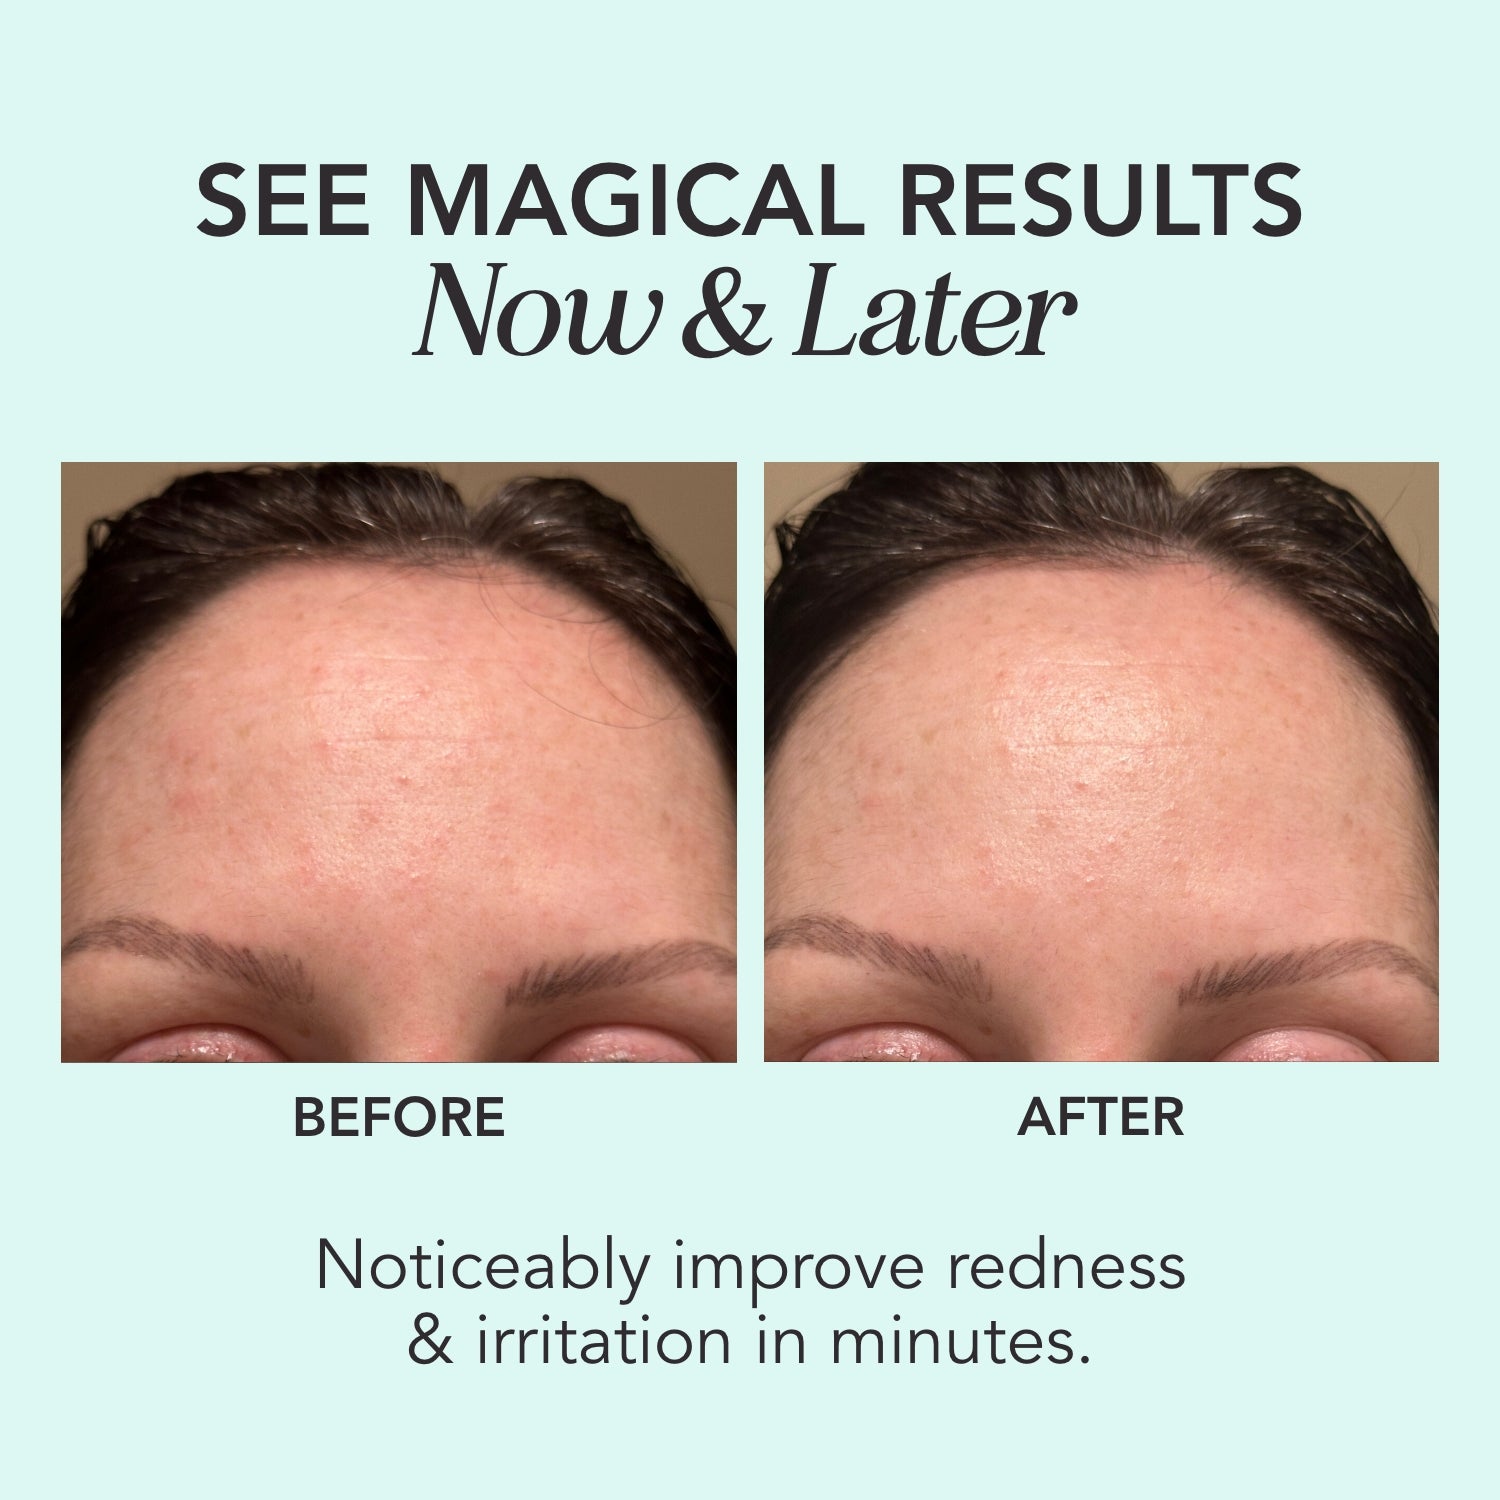 Before and After results showing the redness-reducing benefits of Green Magic Serum